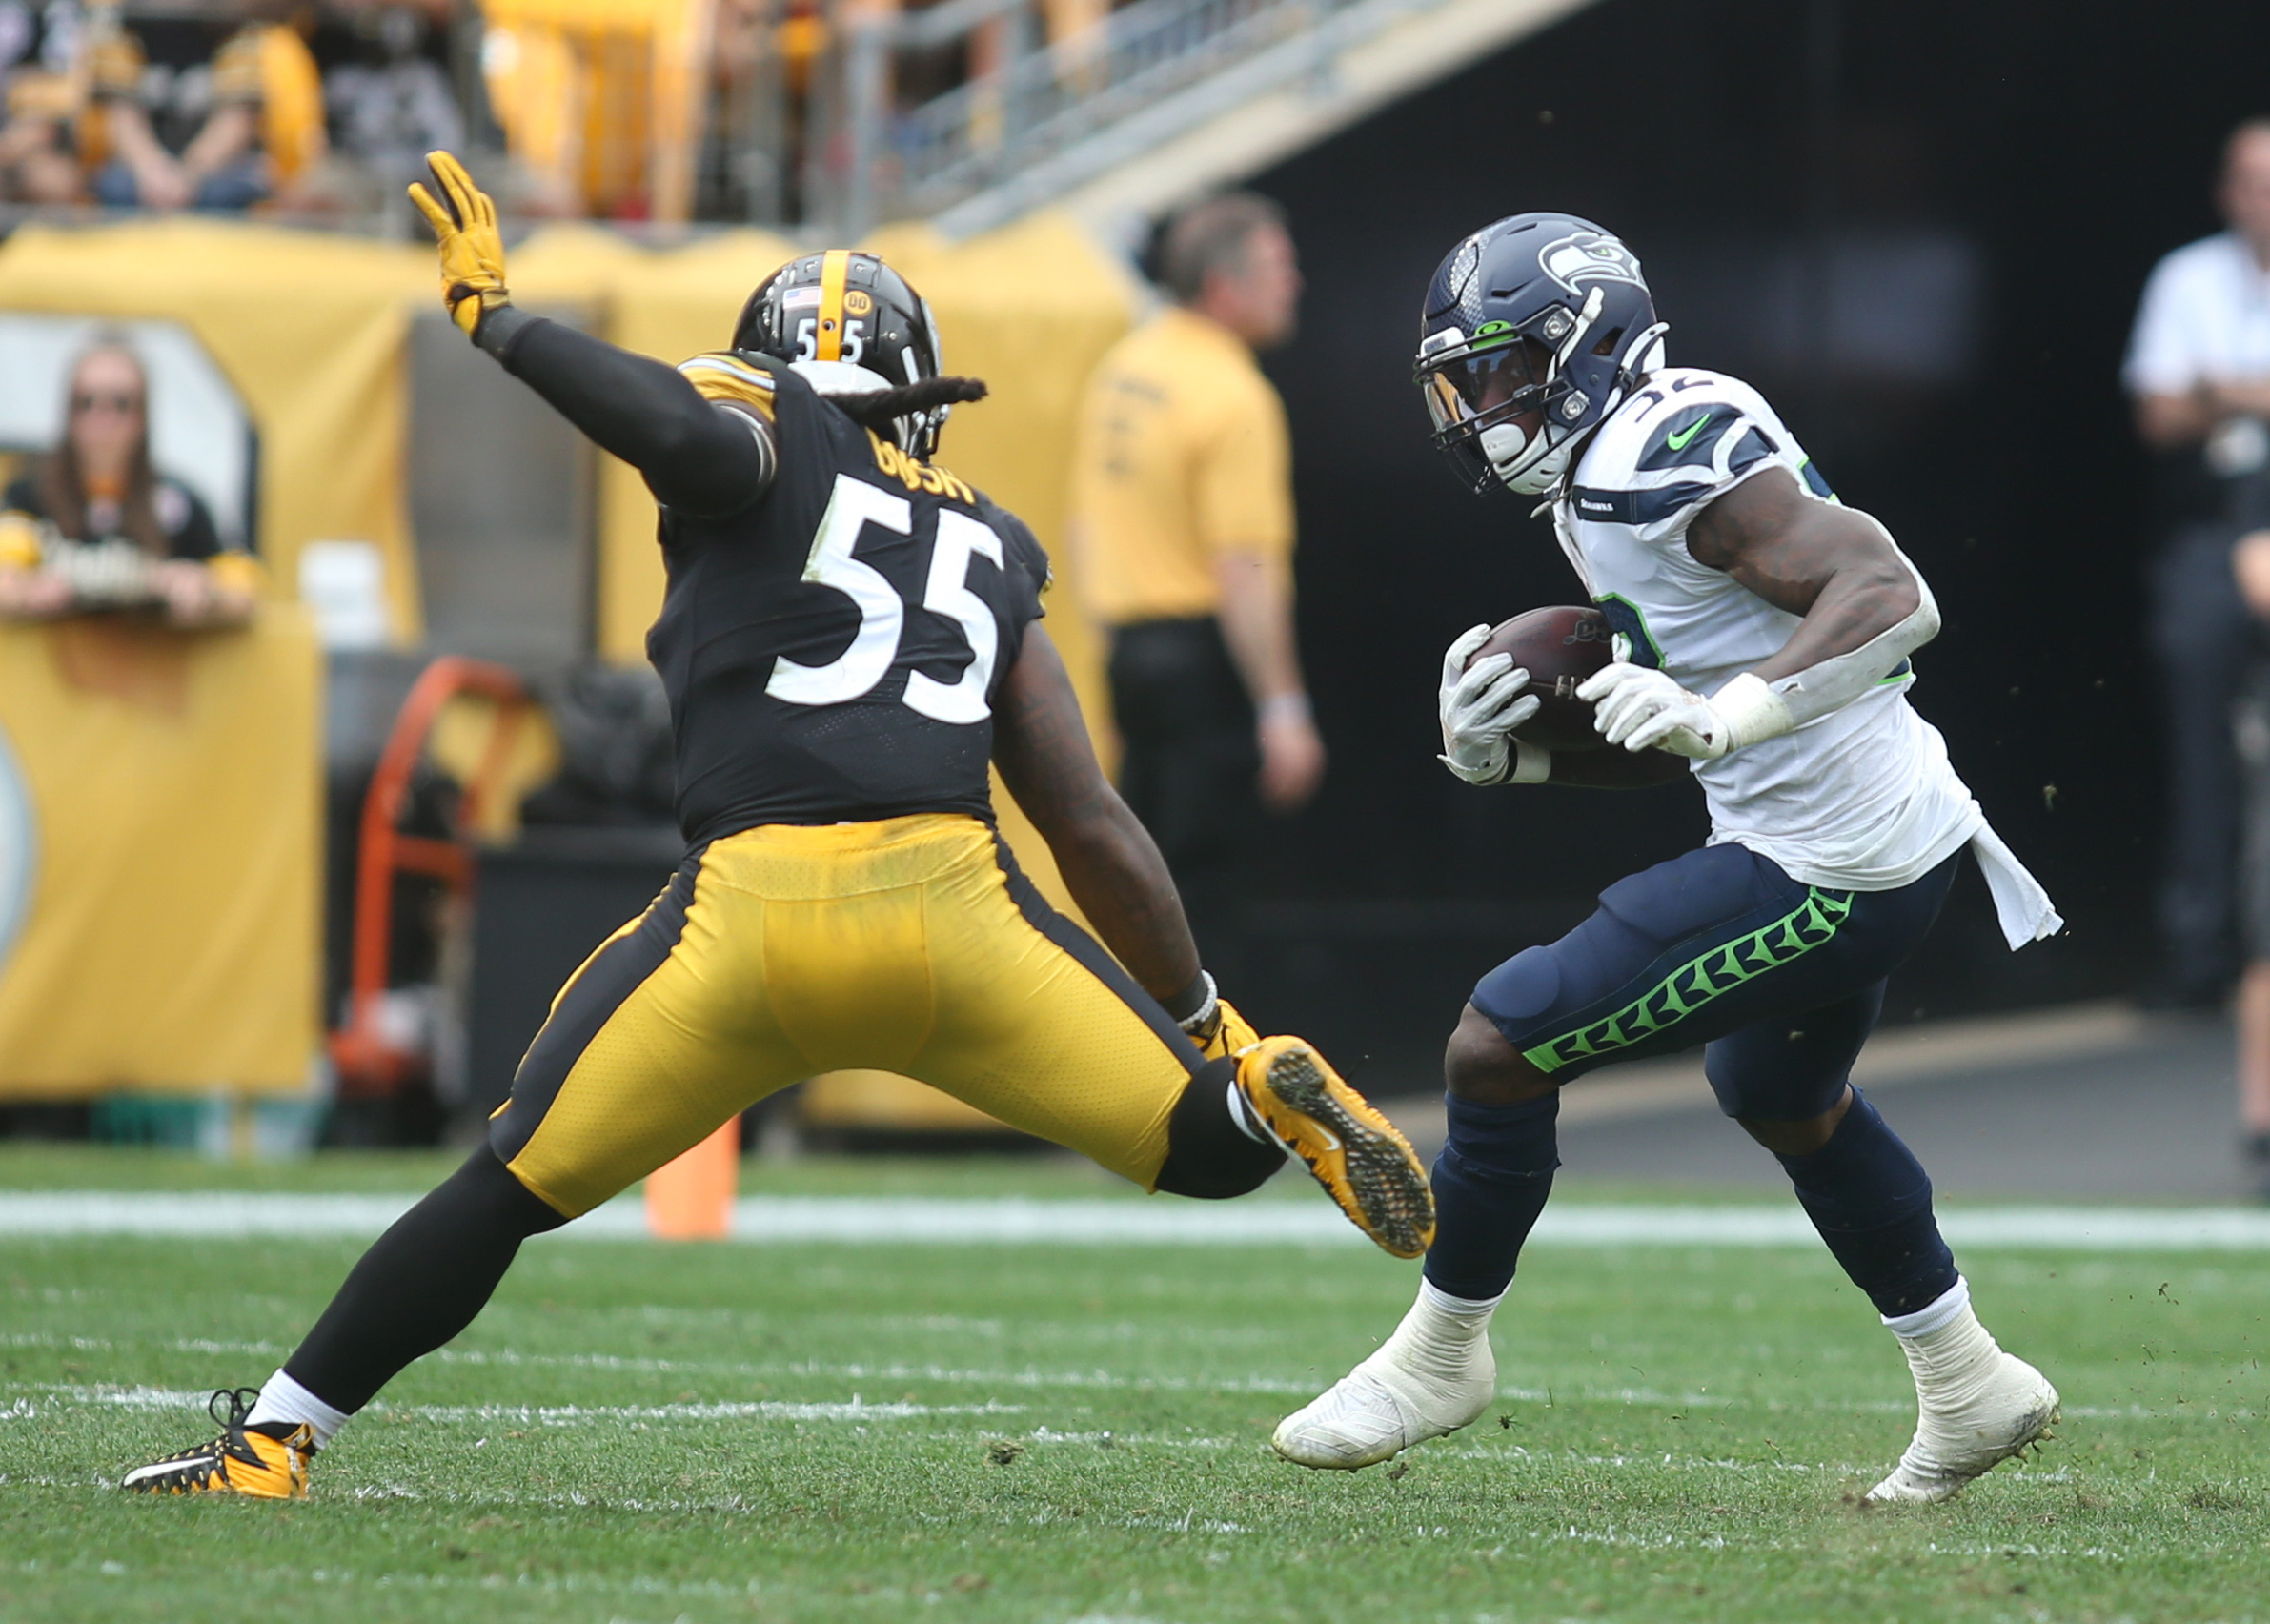 NFL: Seattle Seahawks at Pittsburgh Steelers